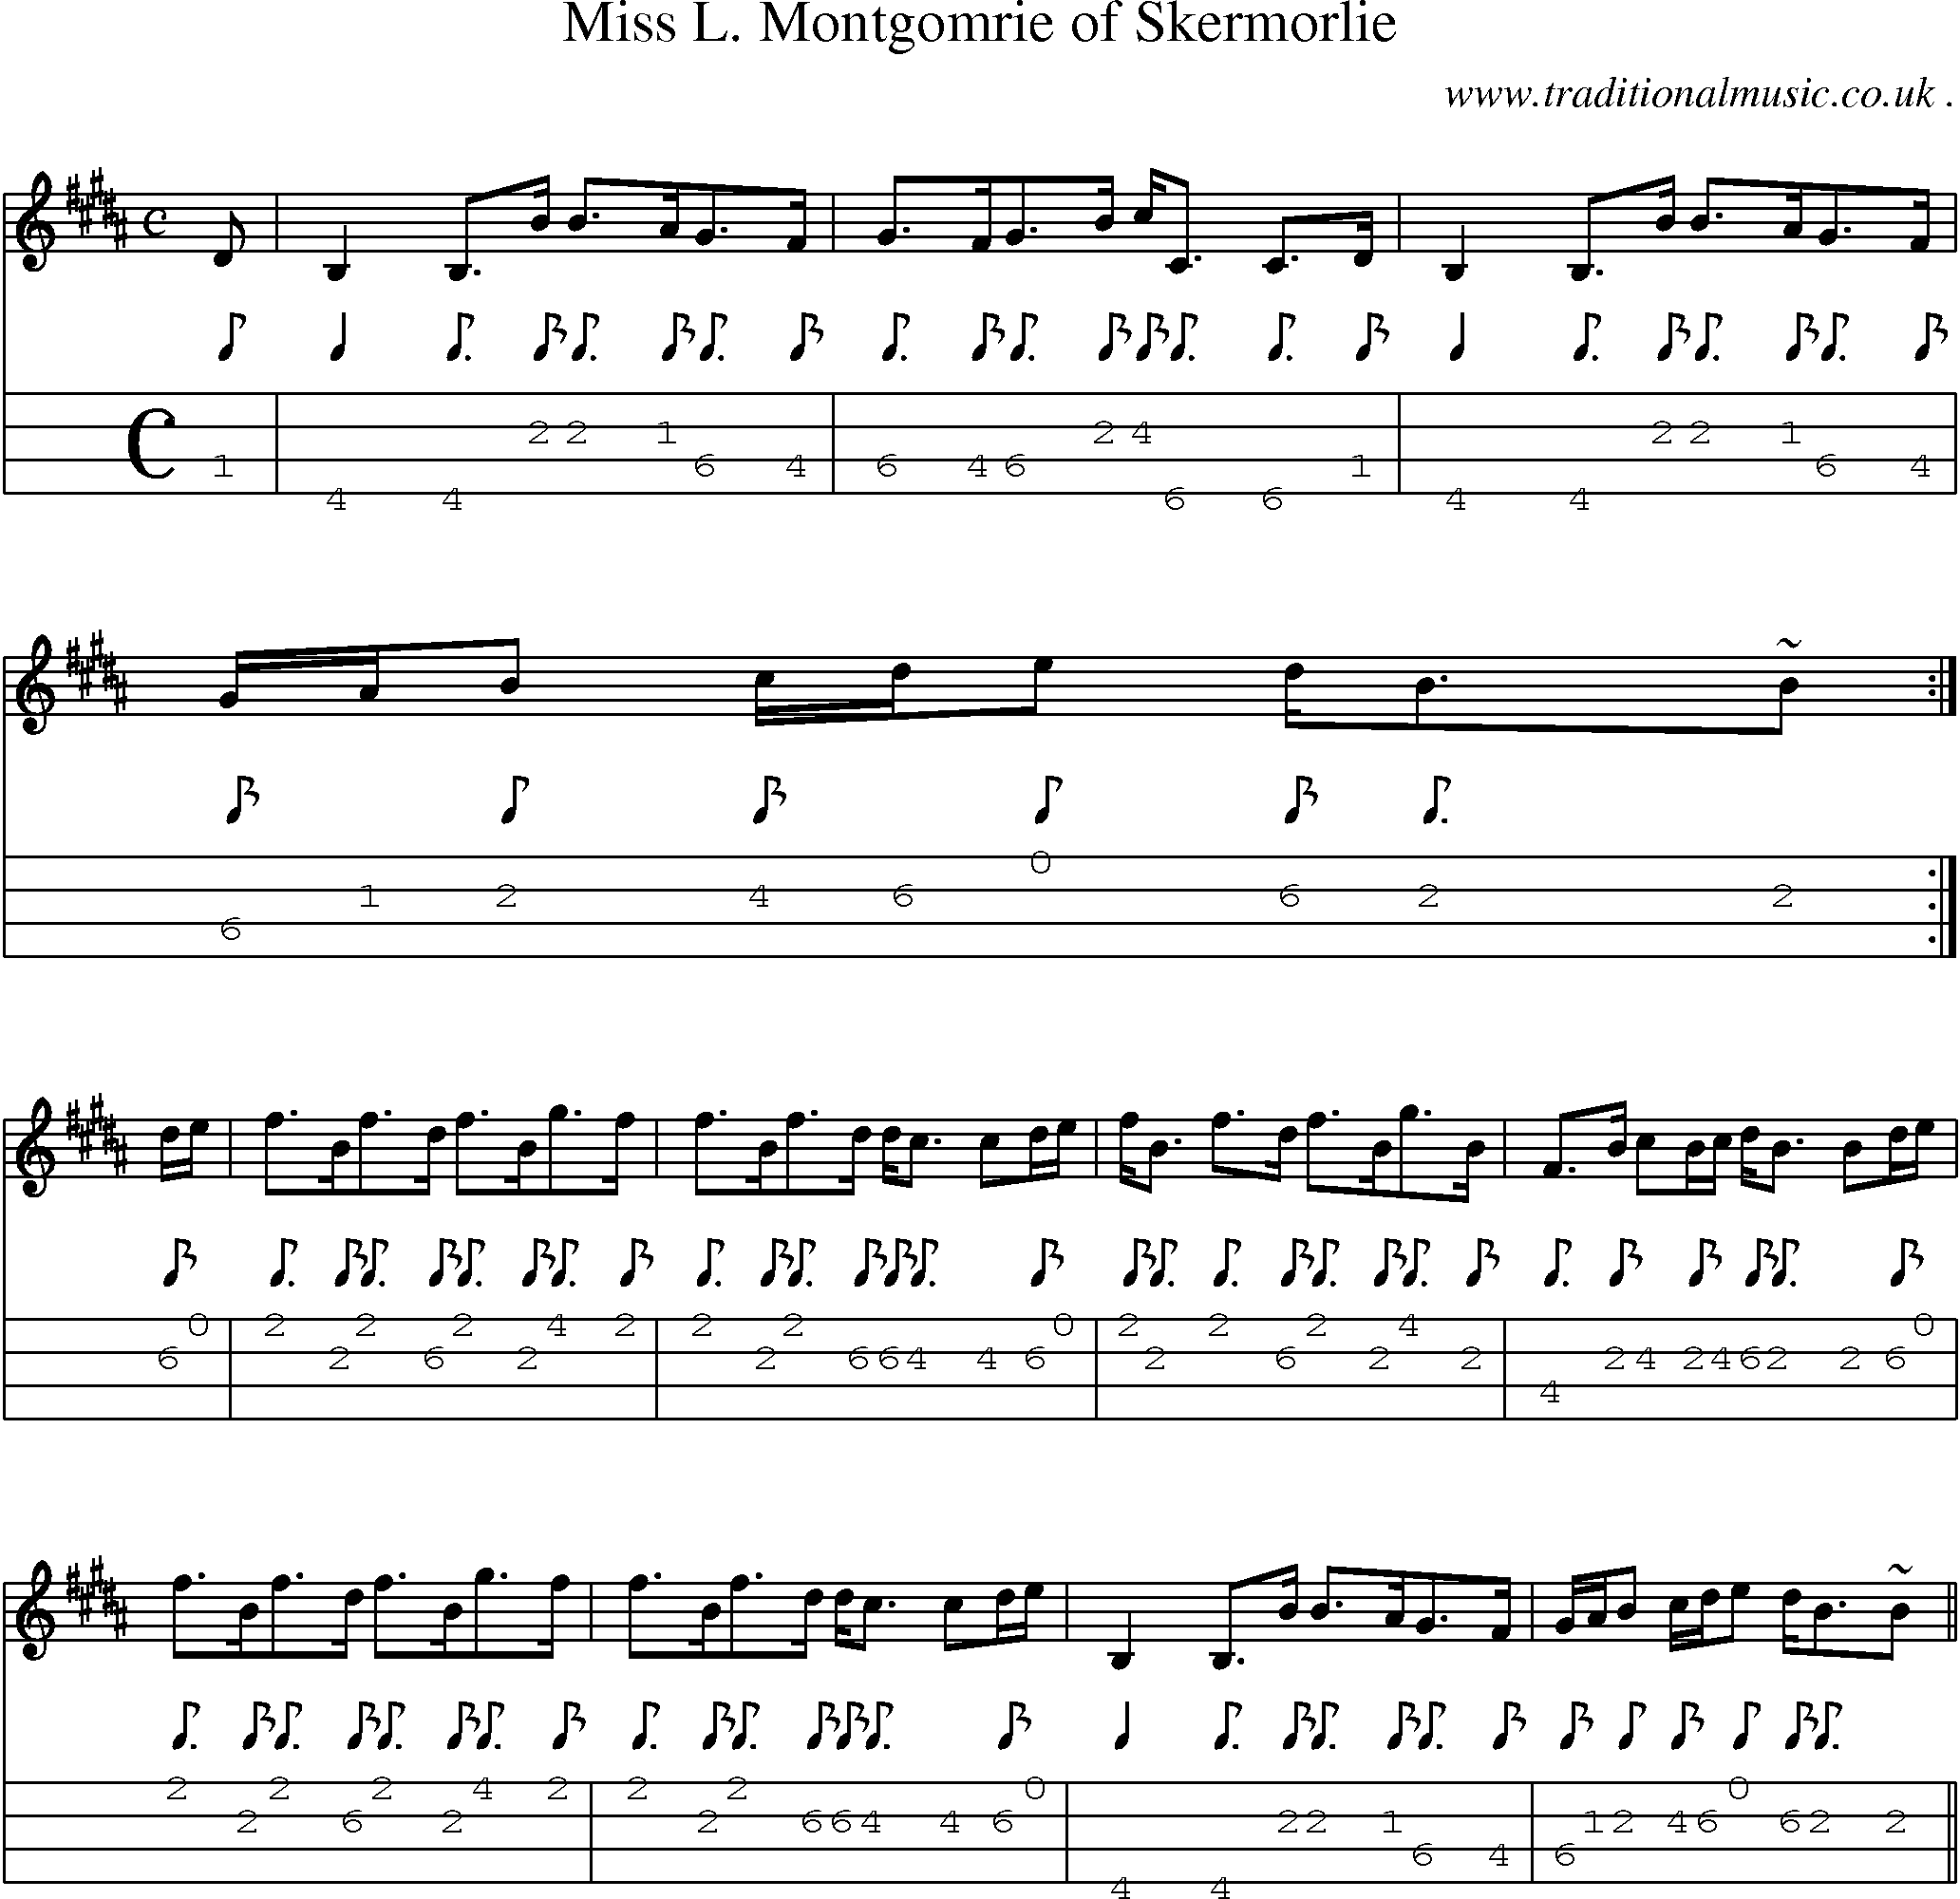 Sheet-music  score, Chords and Mandolin Tabs for Miss L Montgomrie Of Skermorlie